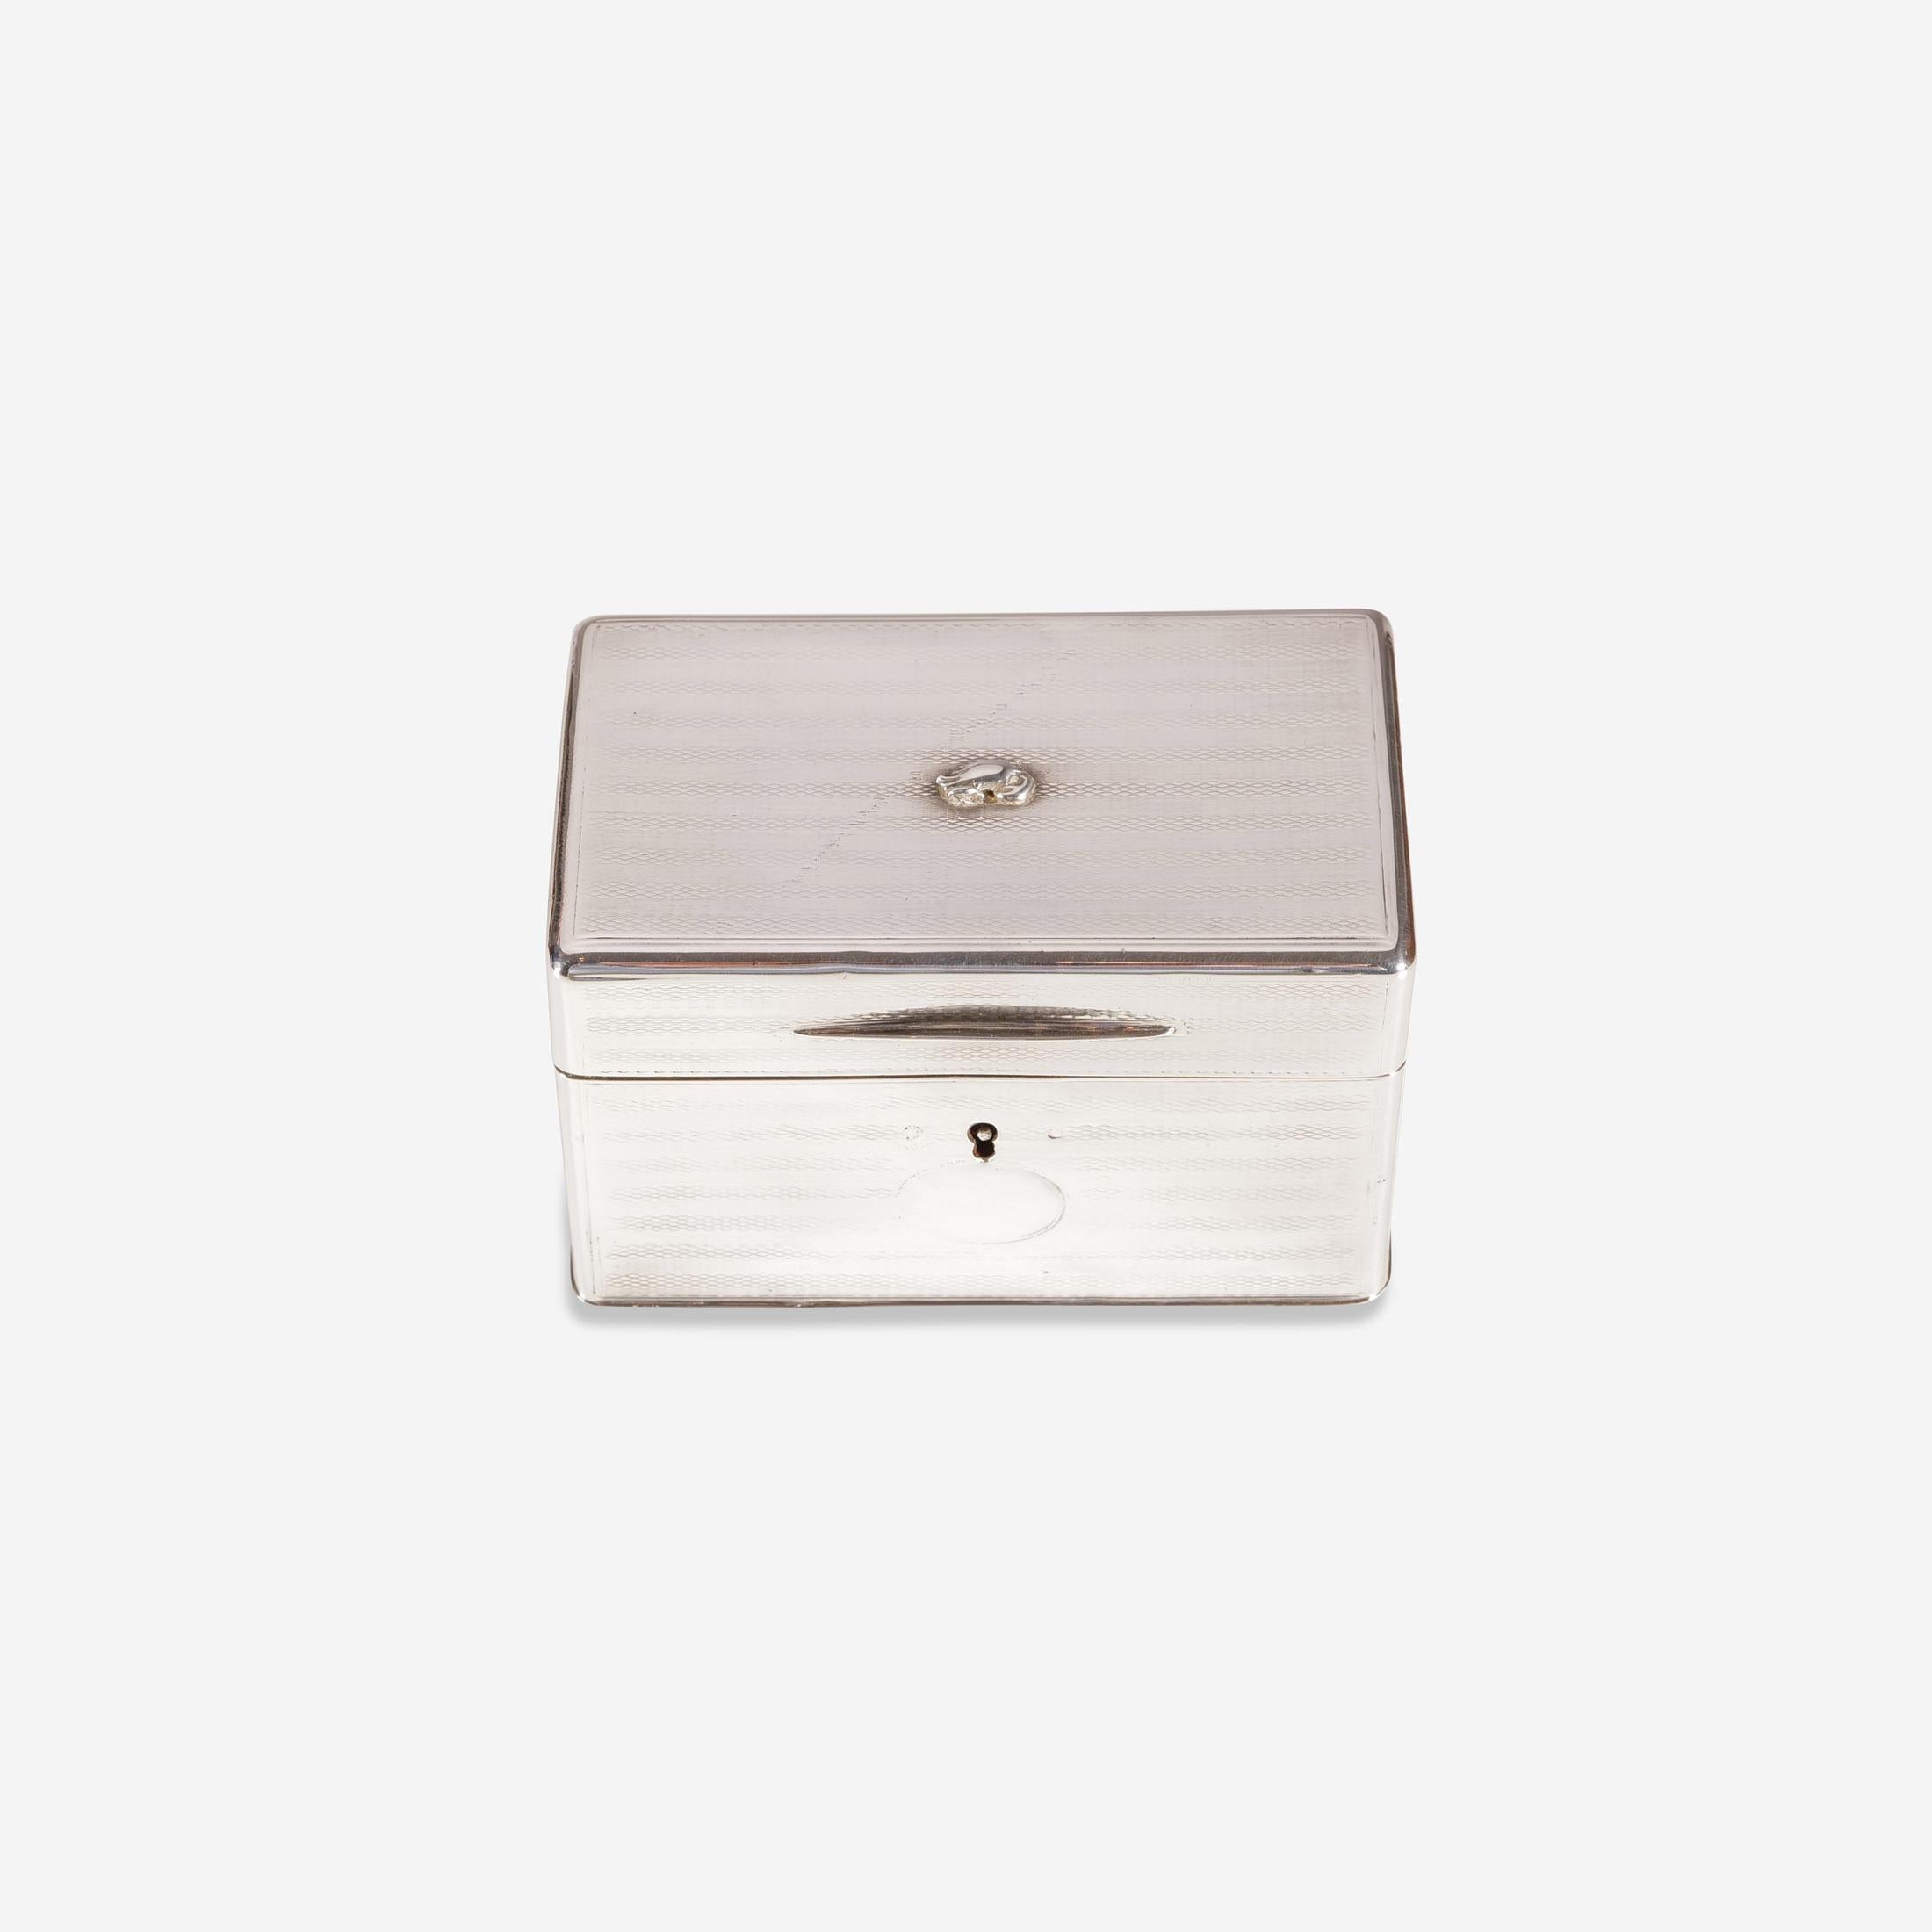 Small casket / caddy, England, London 1820, 925/- sterling silver, rectangular shape with grooved decoration on the body, relief decoration with a small crab on the lid.

Height 6.5 cm, width 9.5 cm, depth 6.5 cm